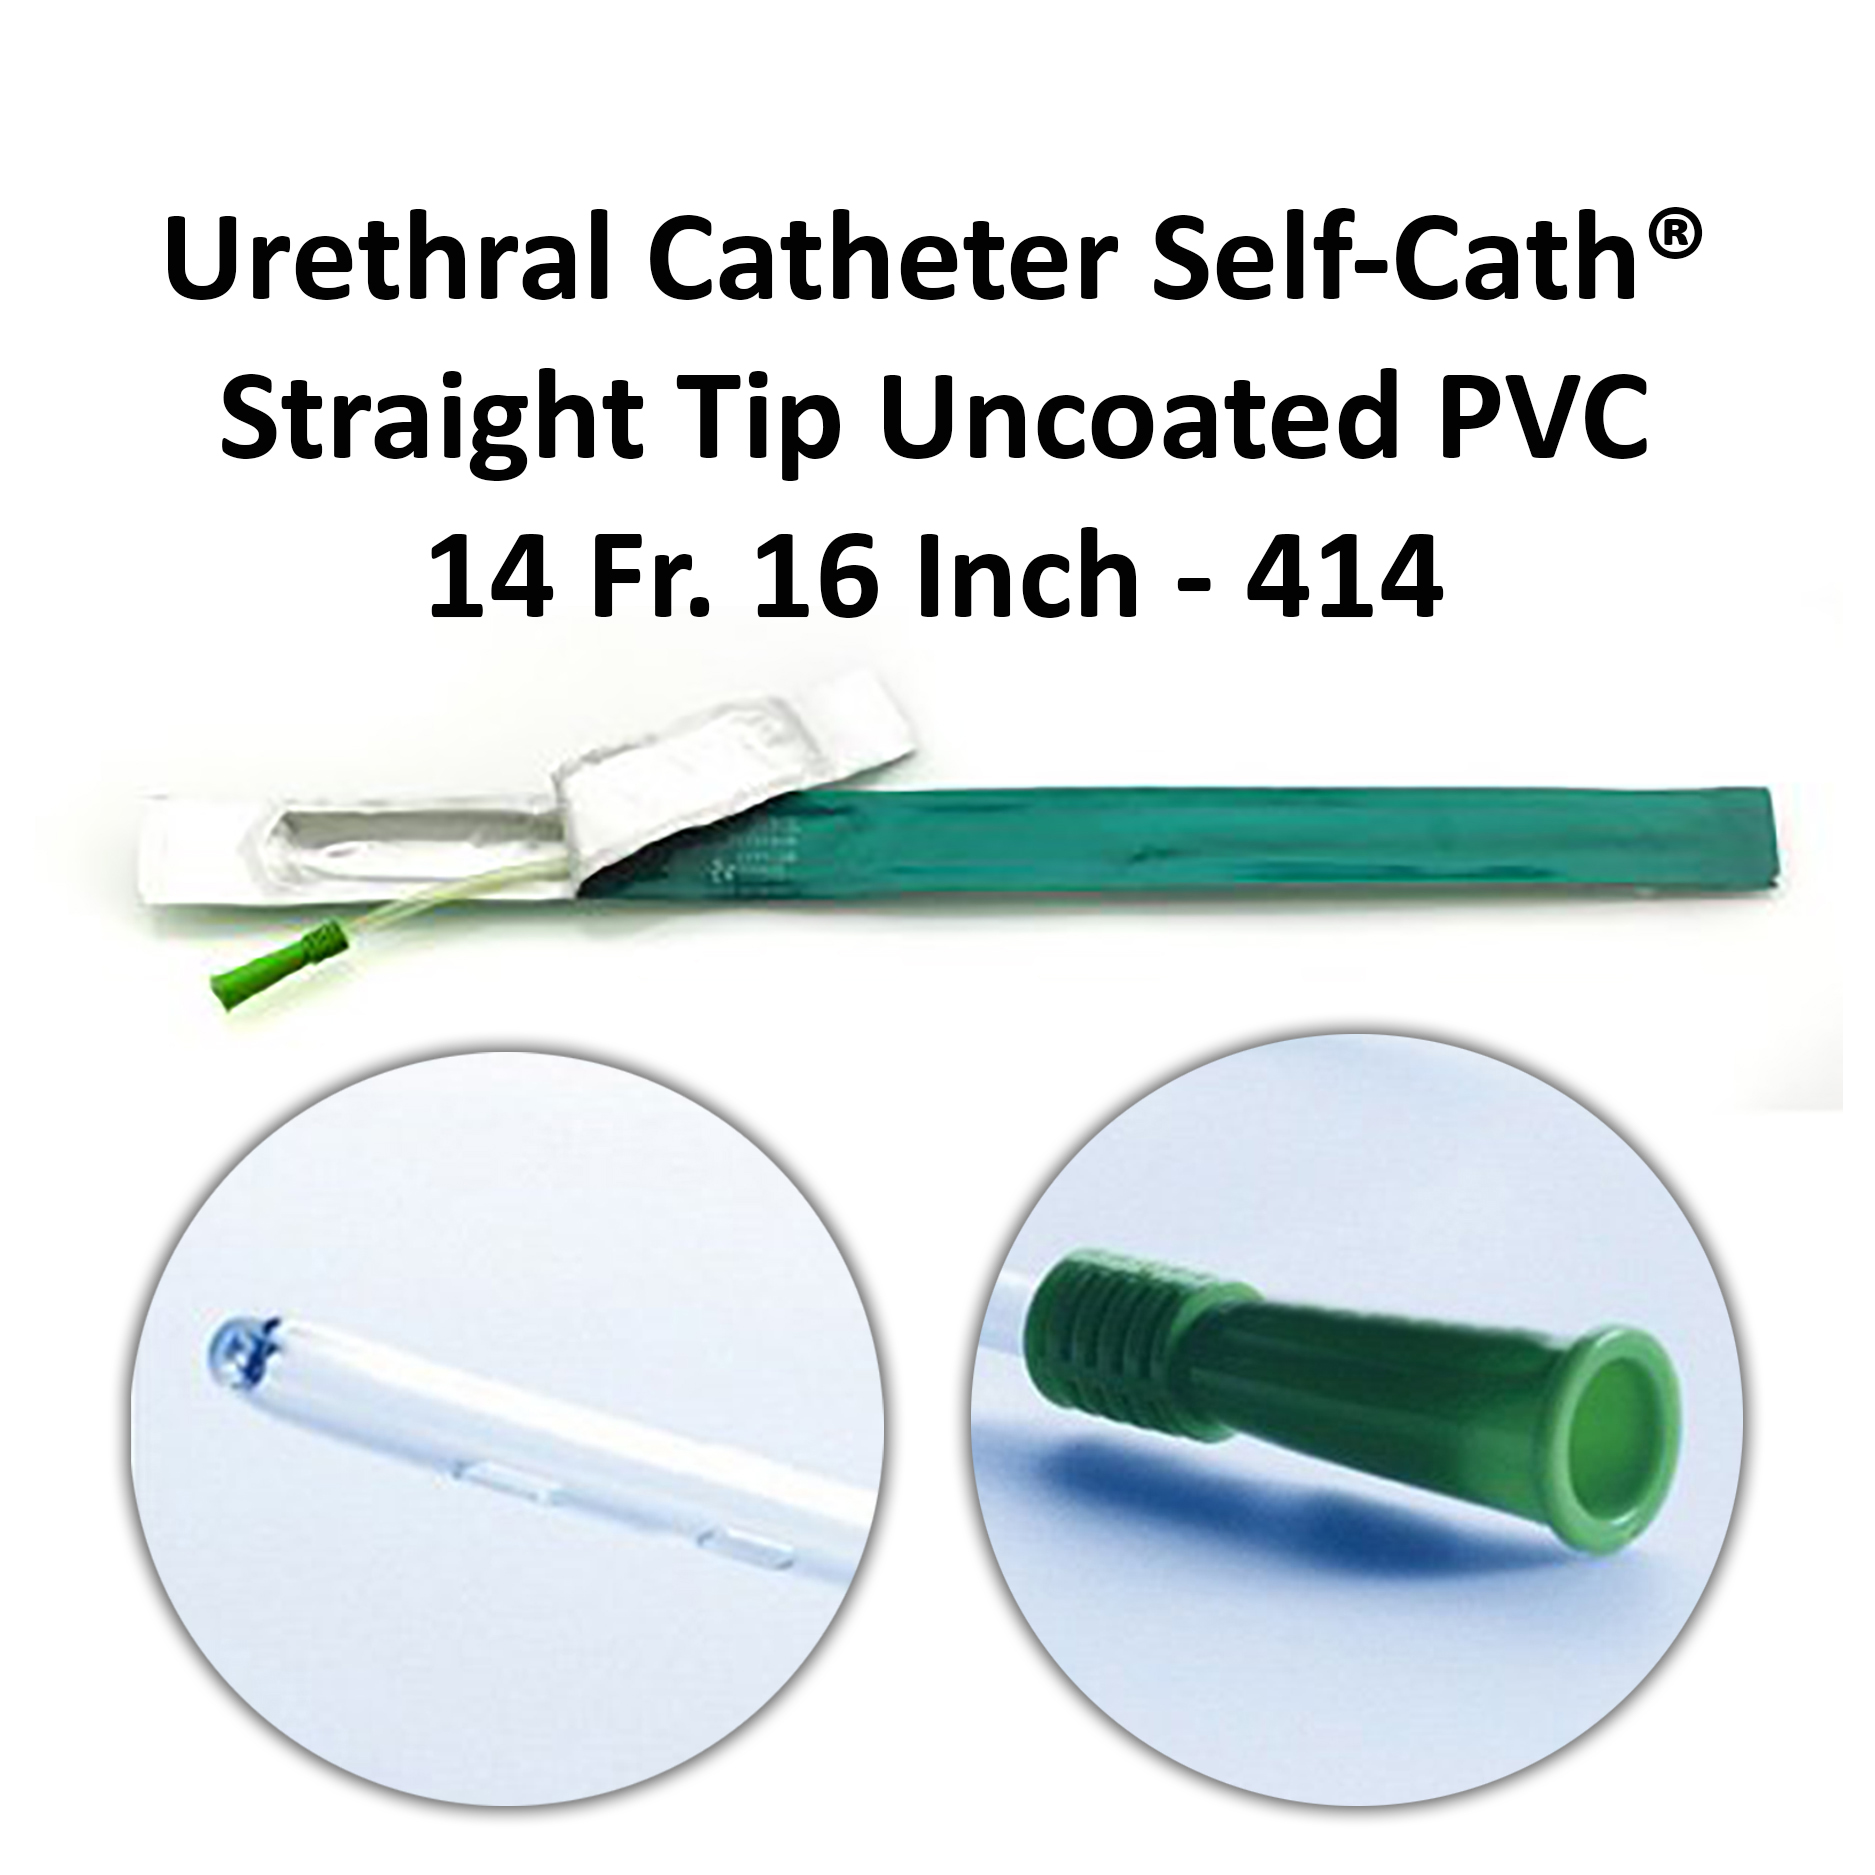 Urethral Catheter Self-Cath® Straight Tip Uncoated PVC 14 Fr. 16 Inch - 414